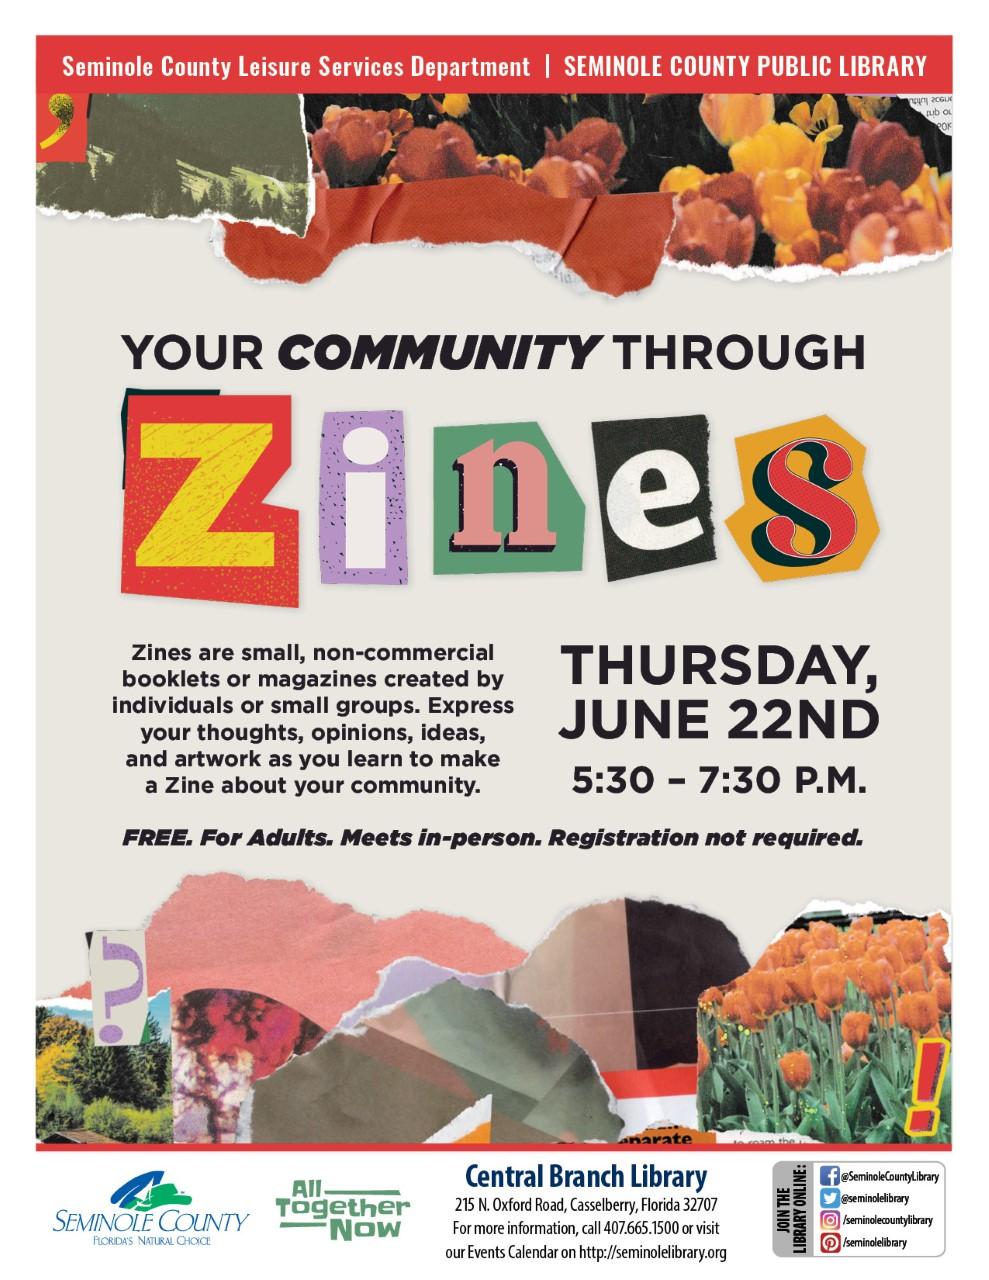 Your Community Through Zines Program at Central Branch Library